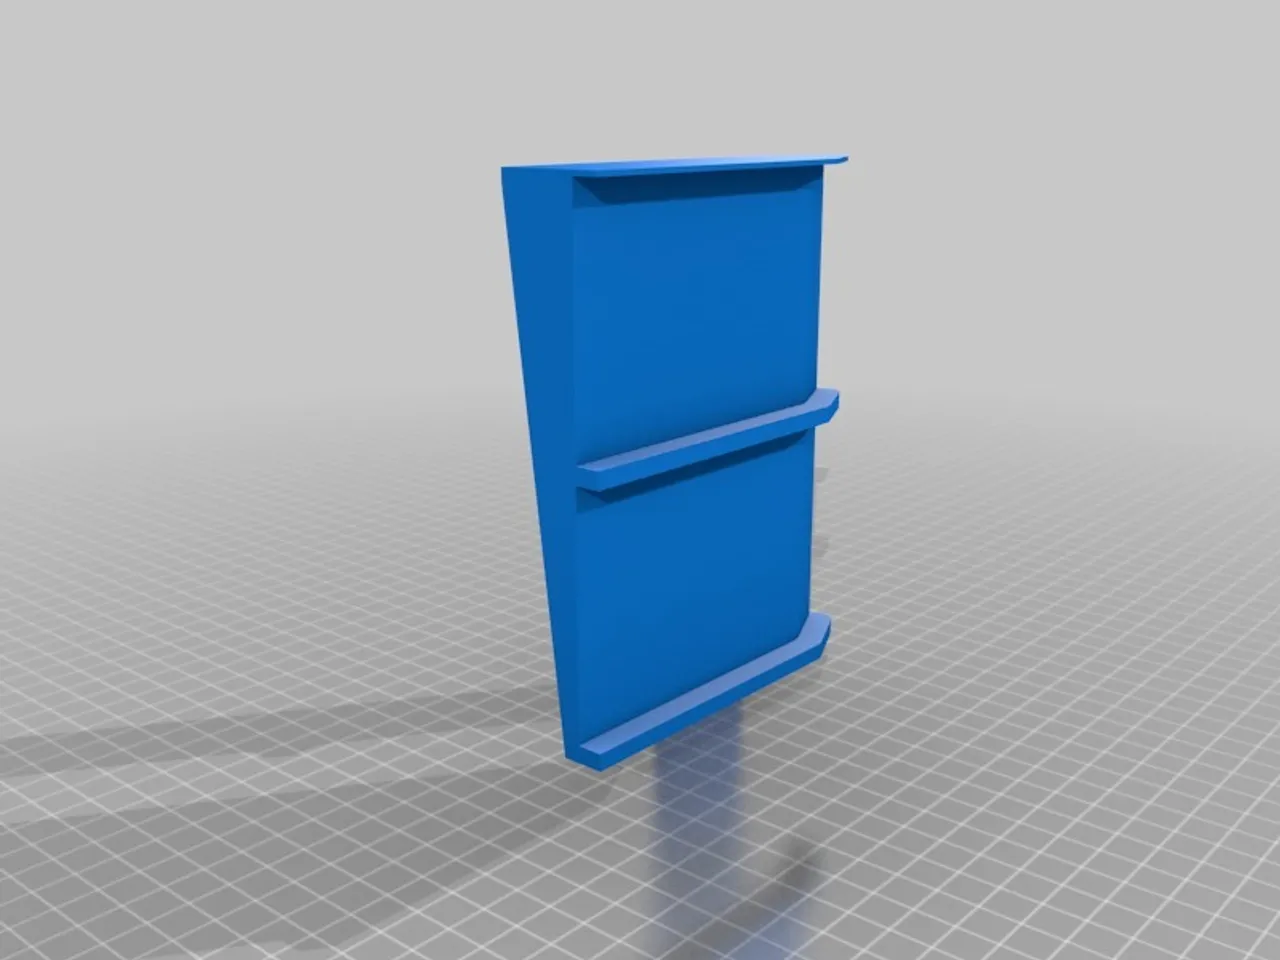 Q-Tip container / Travel container 2 compartments by Joe, Download free  STL model